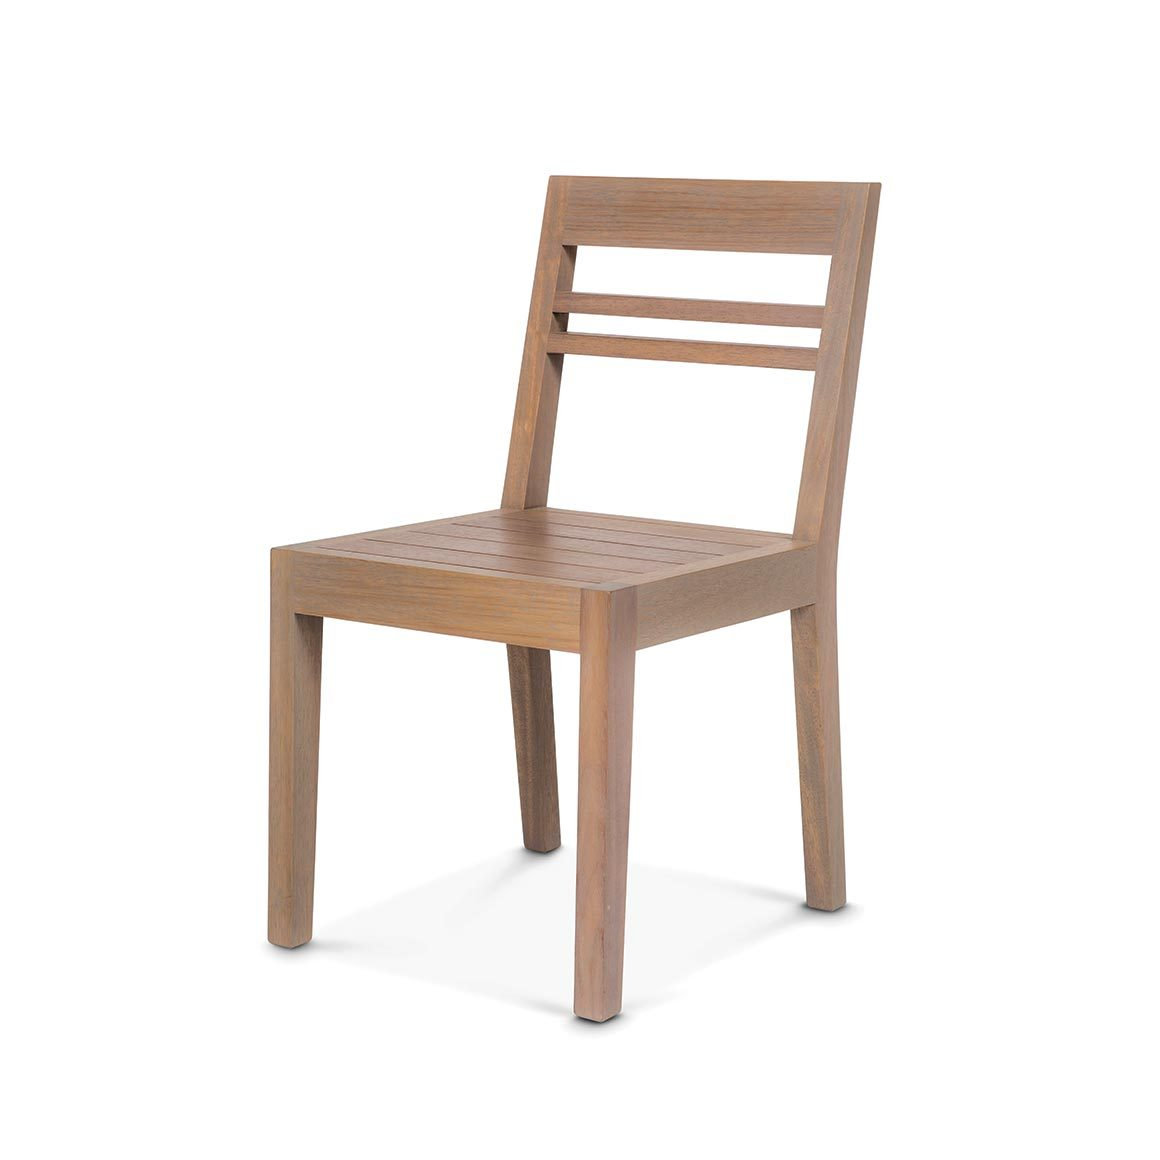 Stanford Patio Dining Chair in dimensions 1160 X 1160